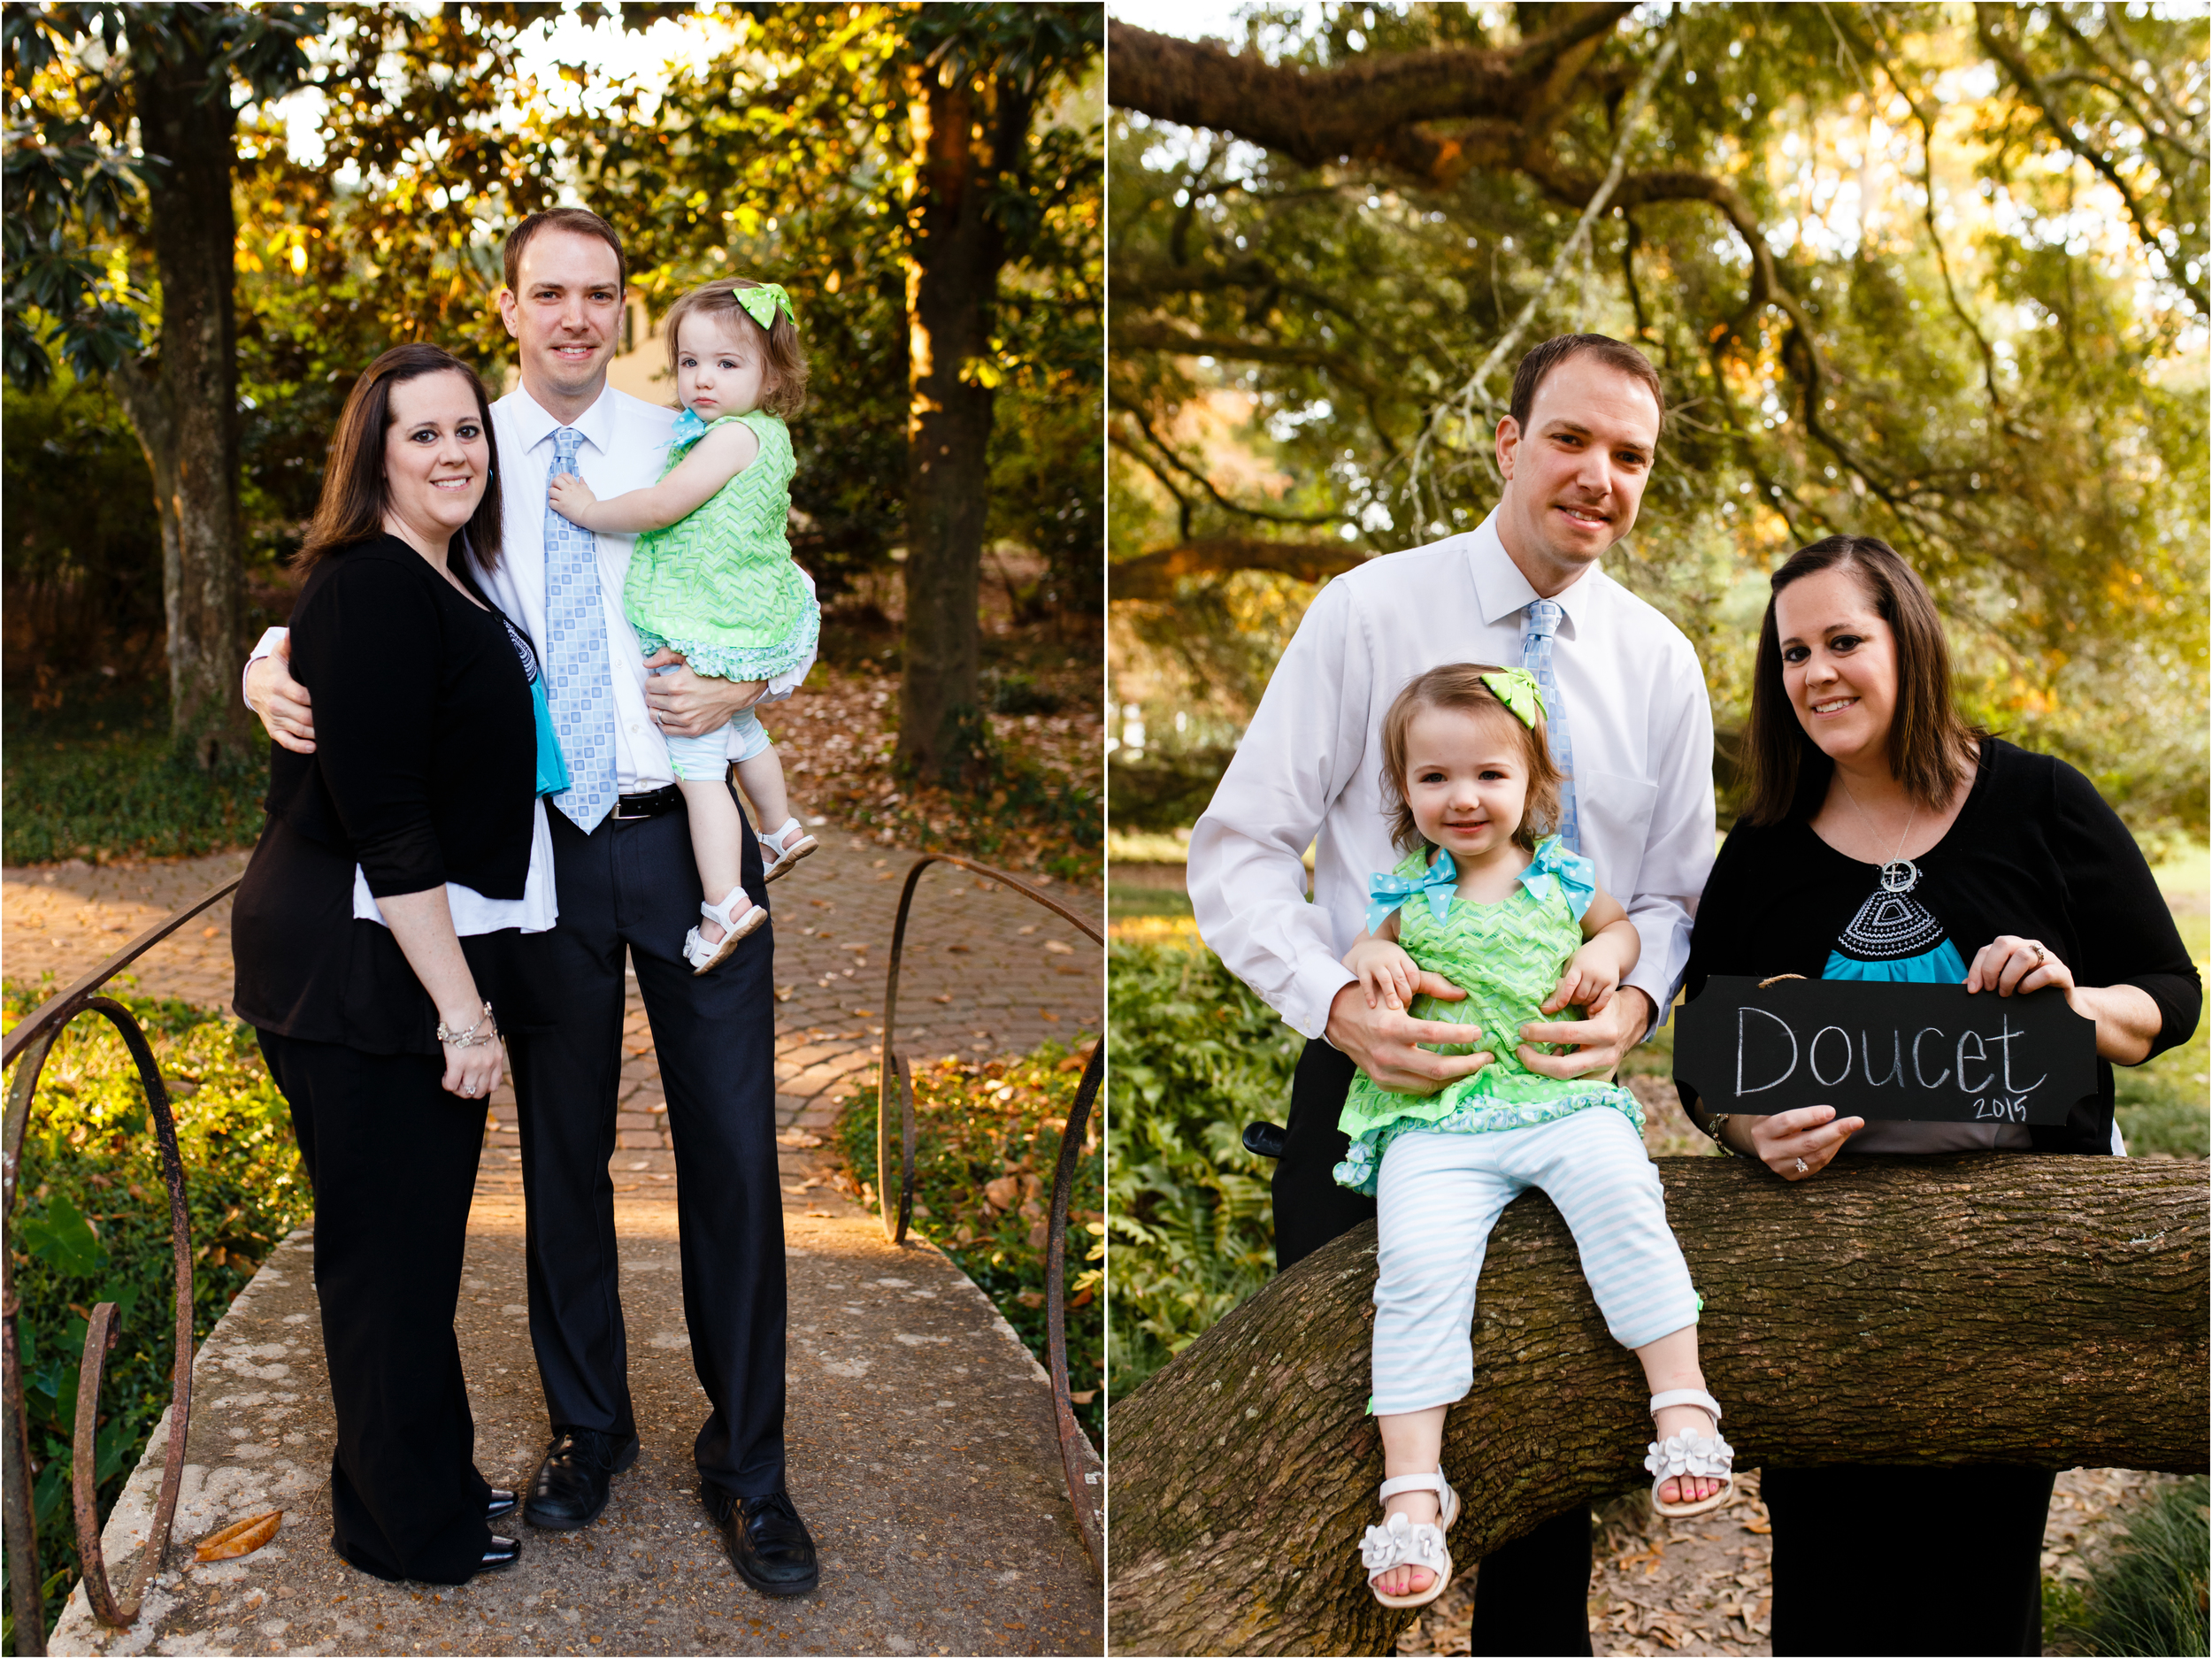 Family-portrait-lafayette-broussard-youngsville-photographer-diptych 4.jpg